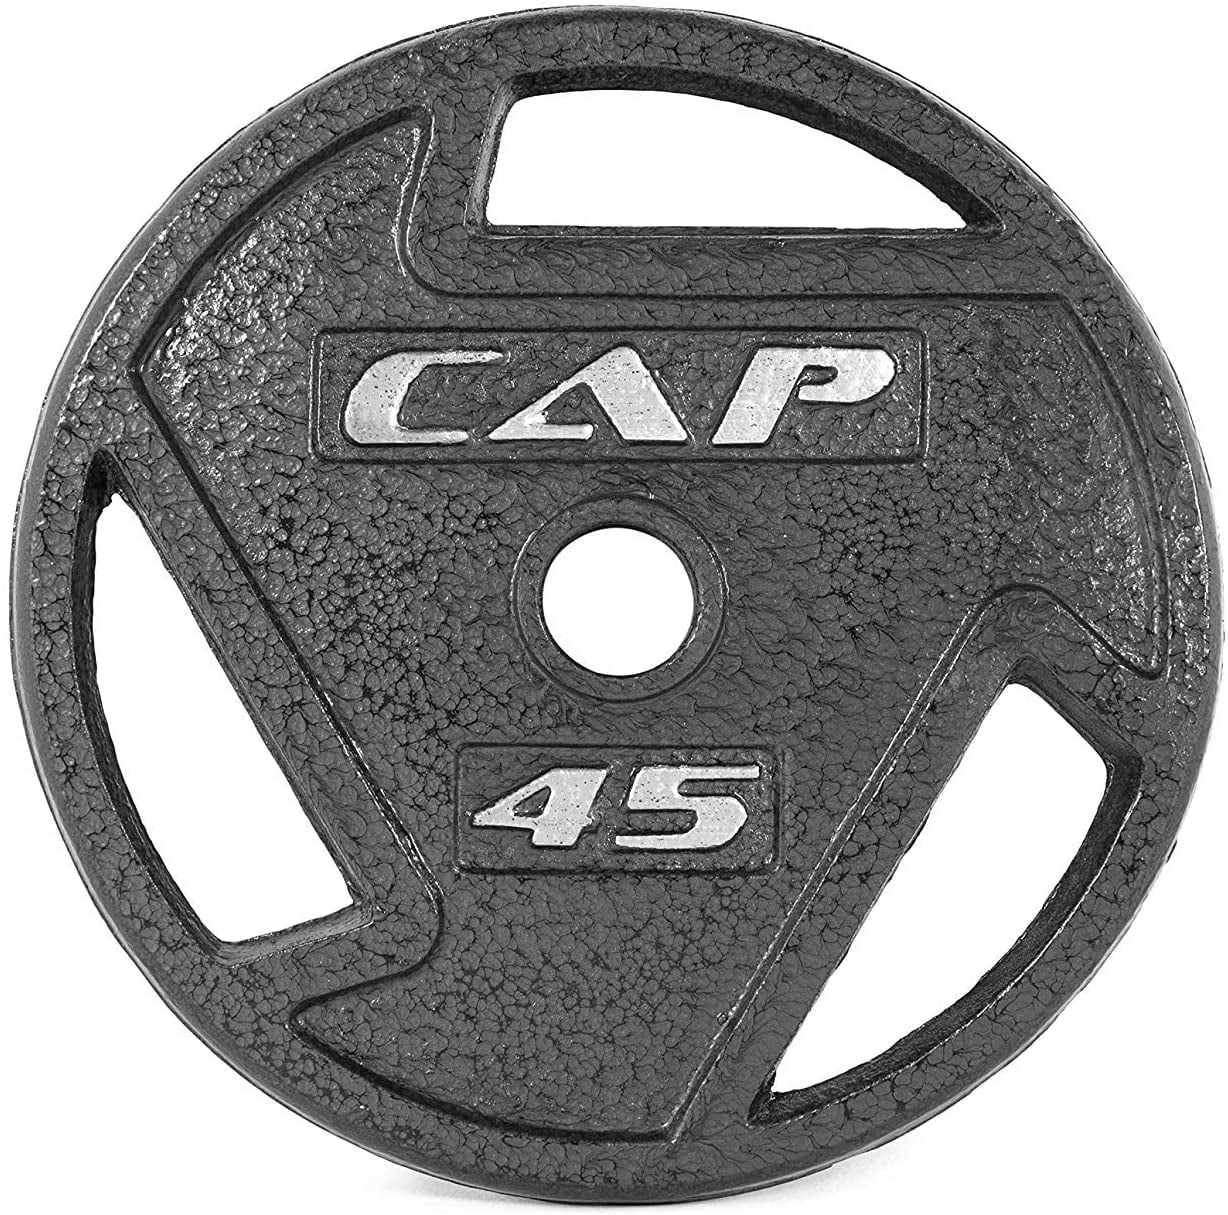 Single Piece CAP Barbell 2 Inch Olympic Grip Plate Cast Iron Weights 2.5-45 lbs 